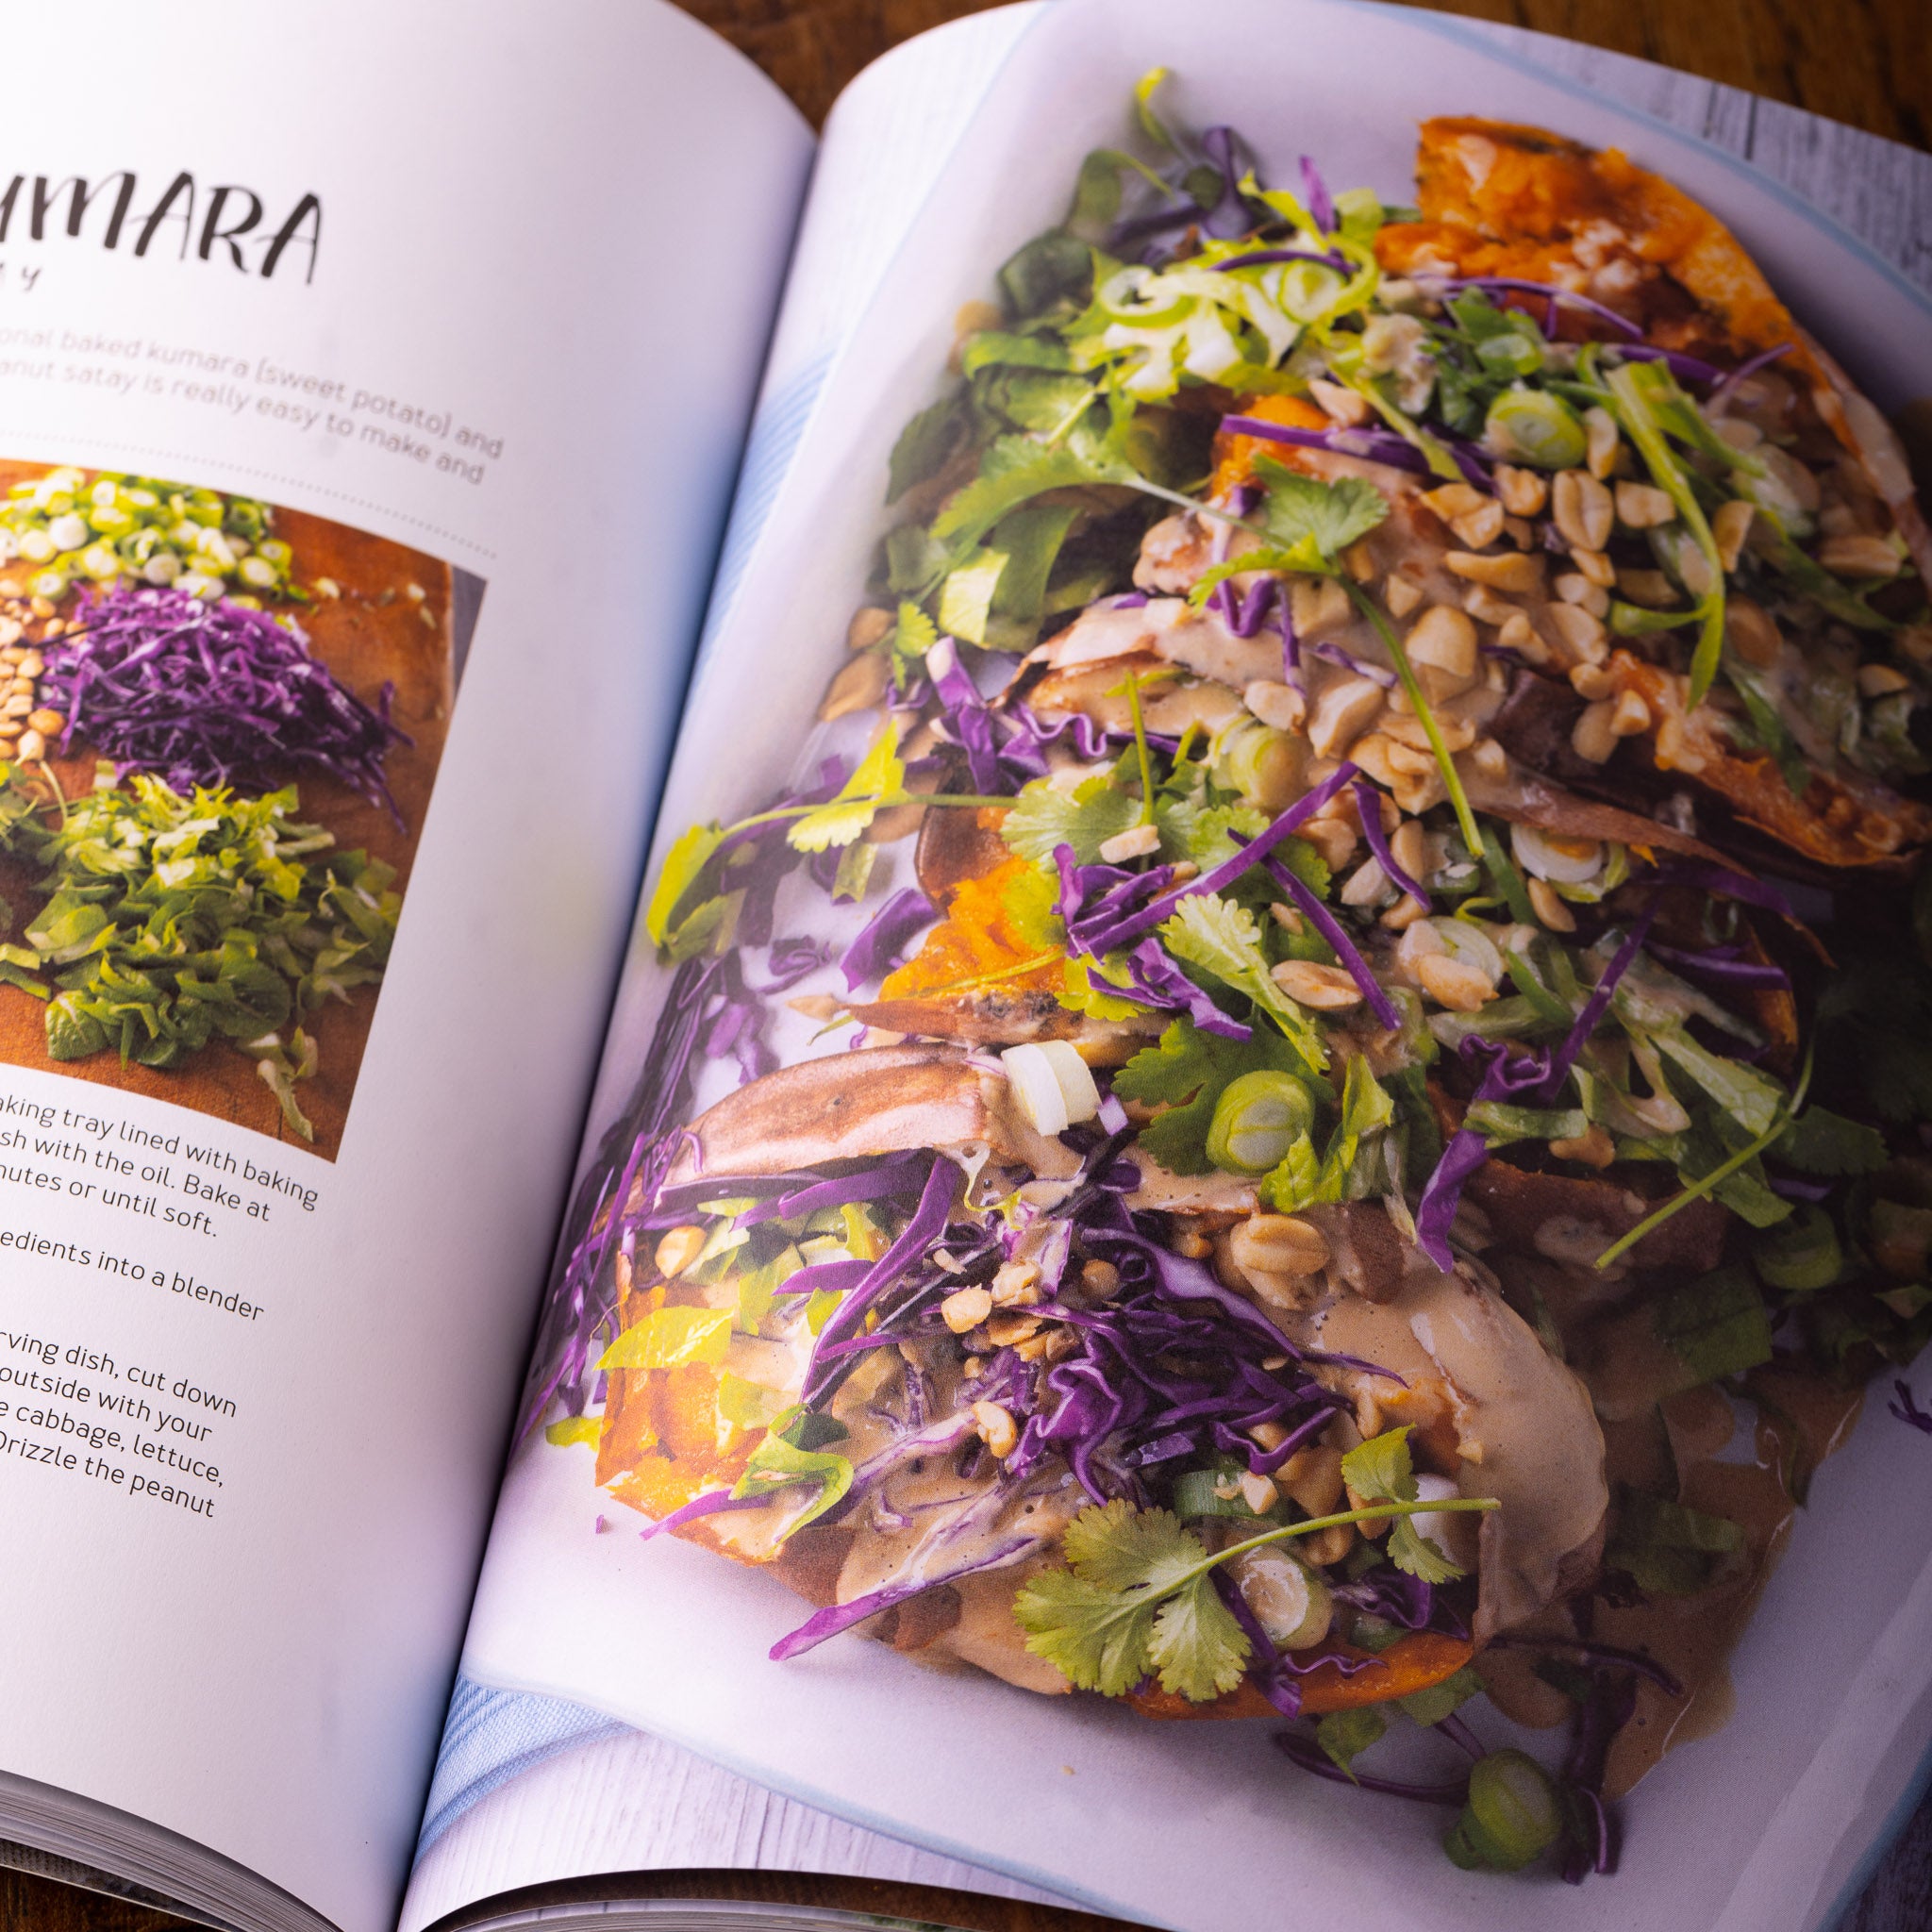 Full colour photo for all recipes!